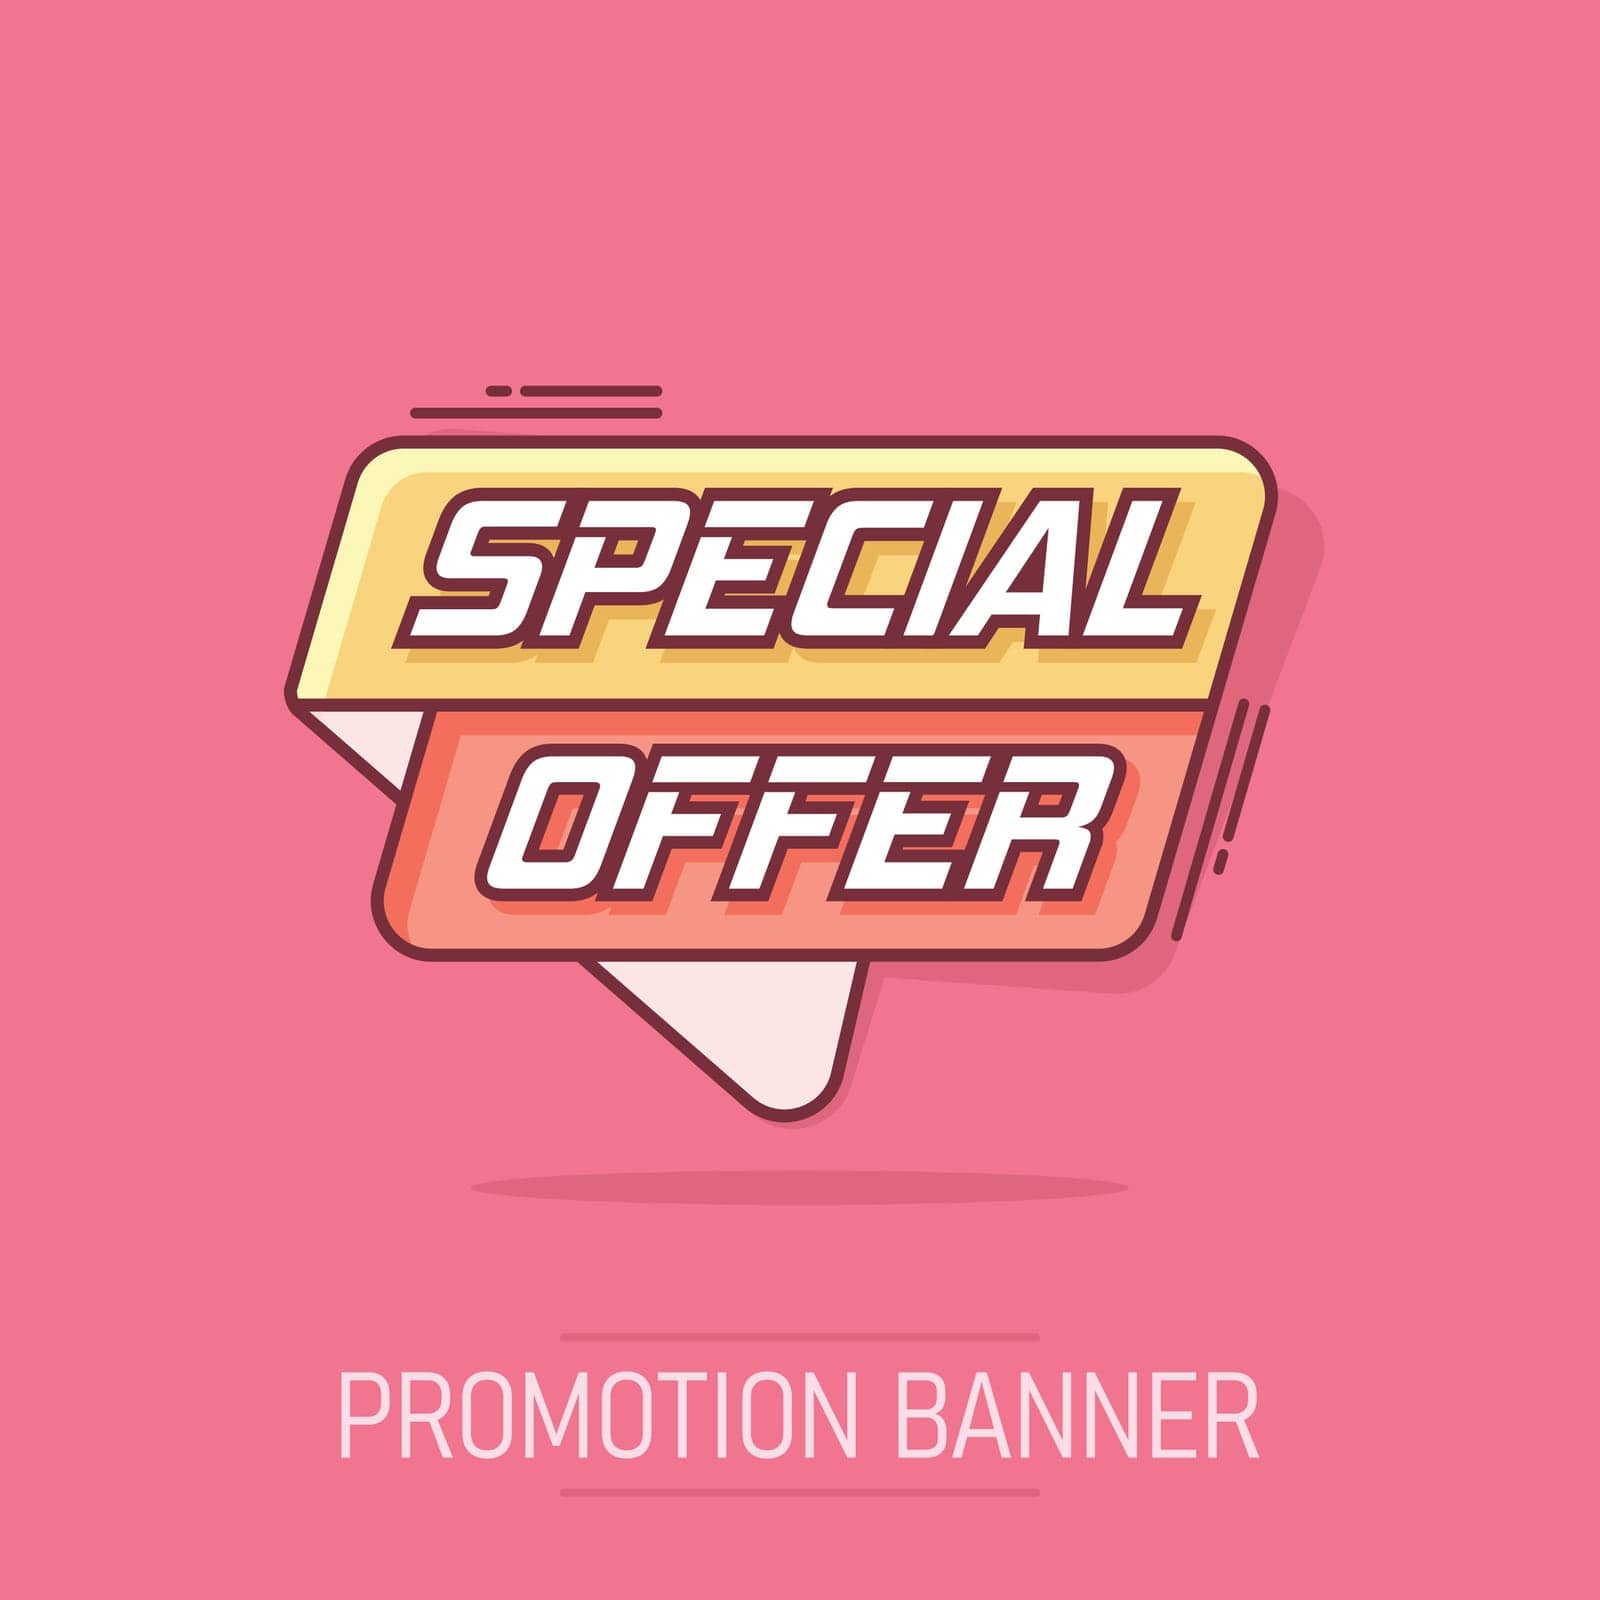 Vector cartoon special offer banner icon in comic style. Badge shopping illustration pictogram. Special offer business splash effect concept. by LysenkoA